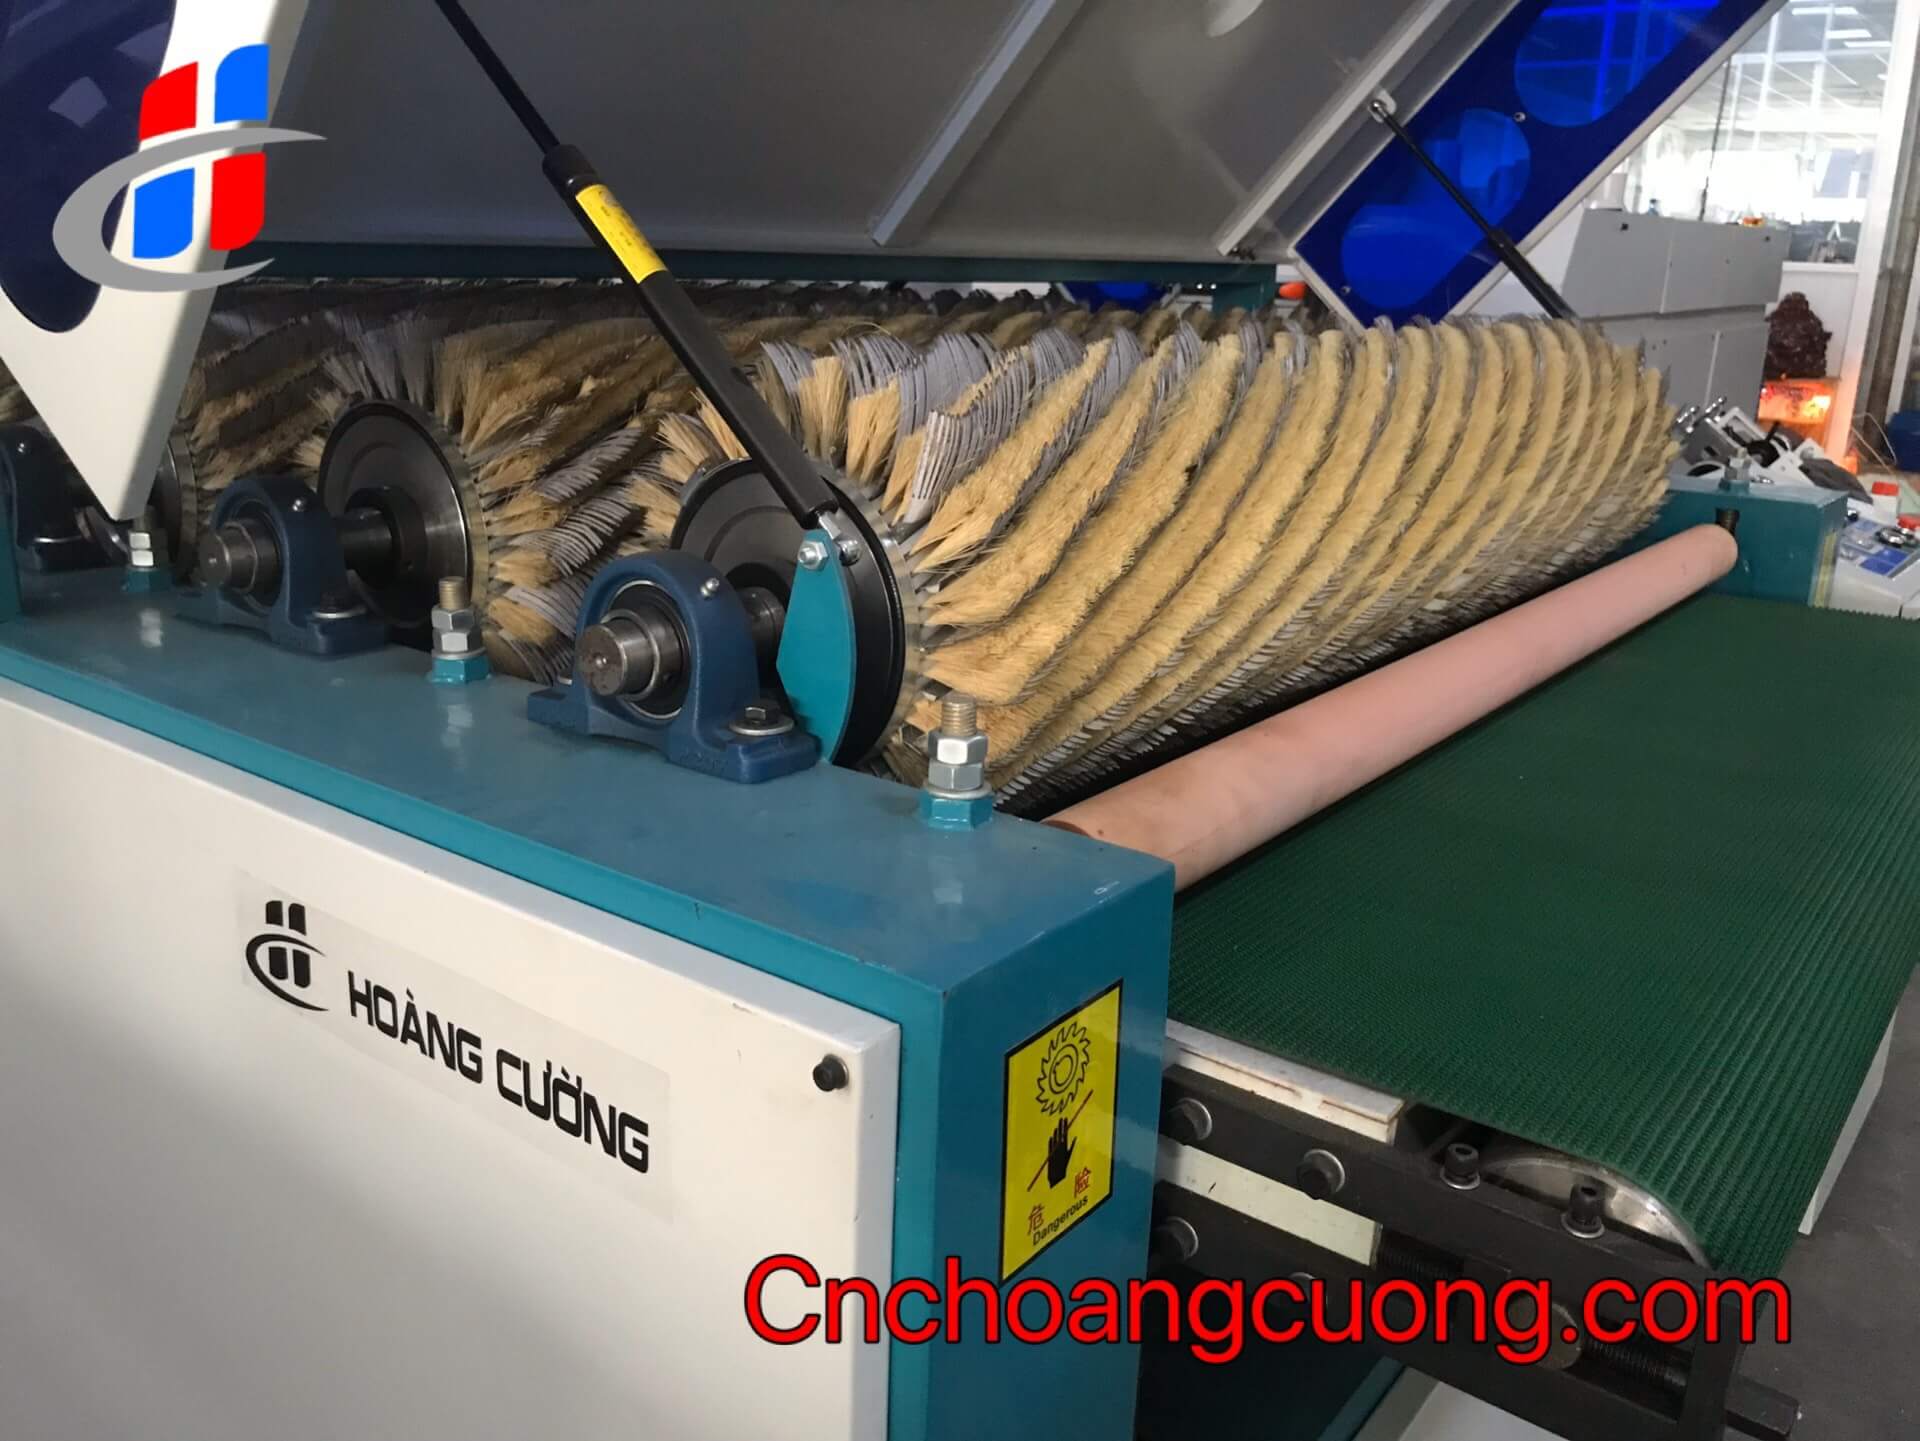 https://cnchoangcuong.com/?post_type=product&p=1187&preview=true